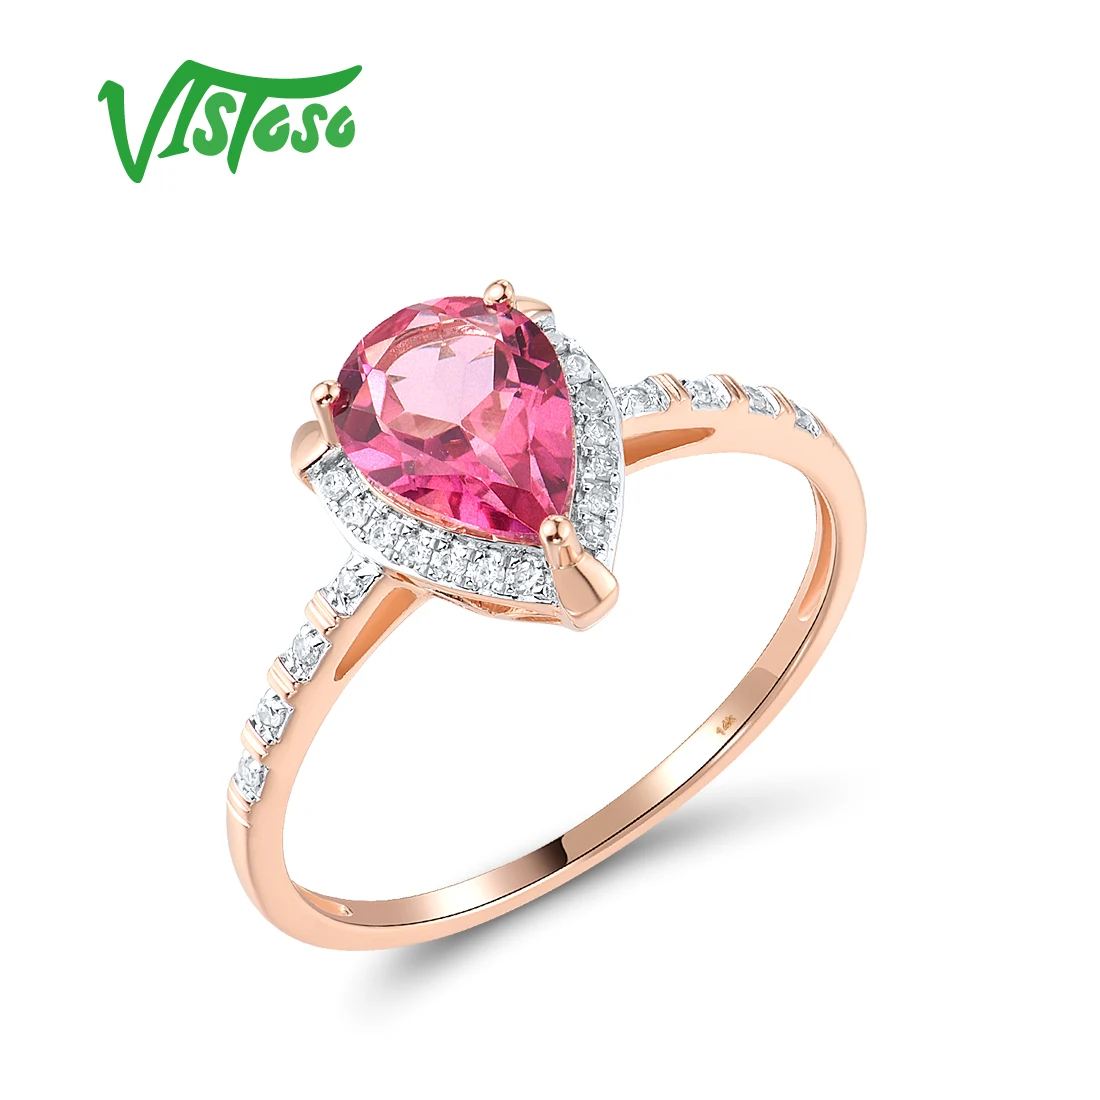 

VISTOSO Authentic 14K 585 Rose Gold Ring For Women Sparkling Diamond Pink Topaz Wedding Anniversary Gift Solitaire Fine Jewelry